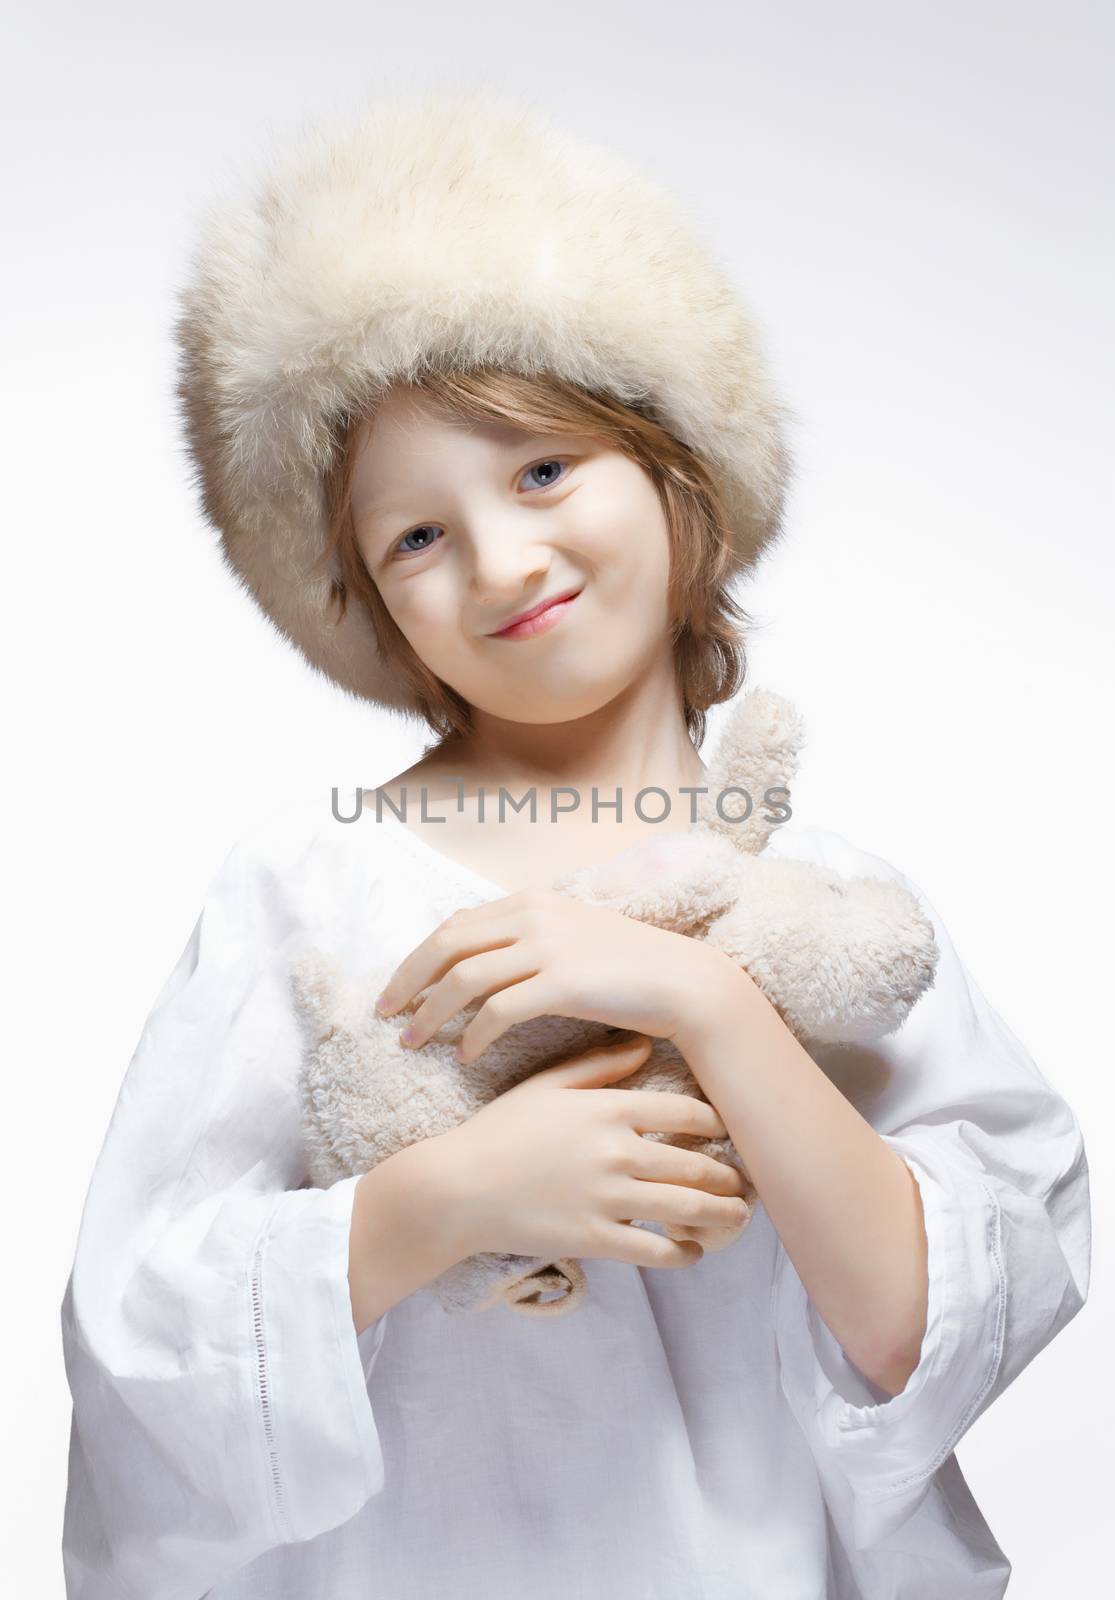 Portrait of a Boy with Fluffy Hat and Stuffed Animal by courtyardpix